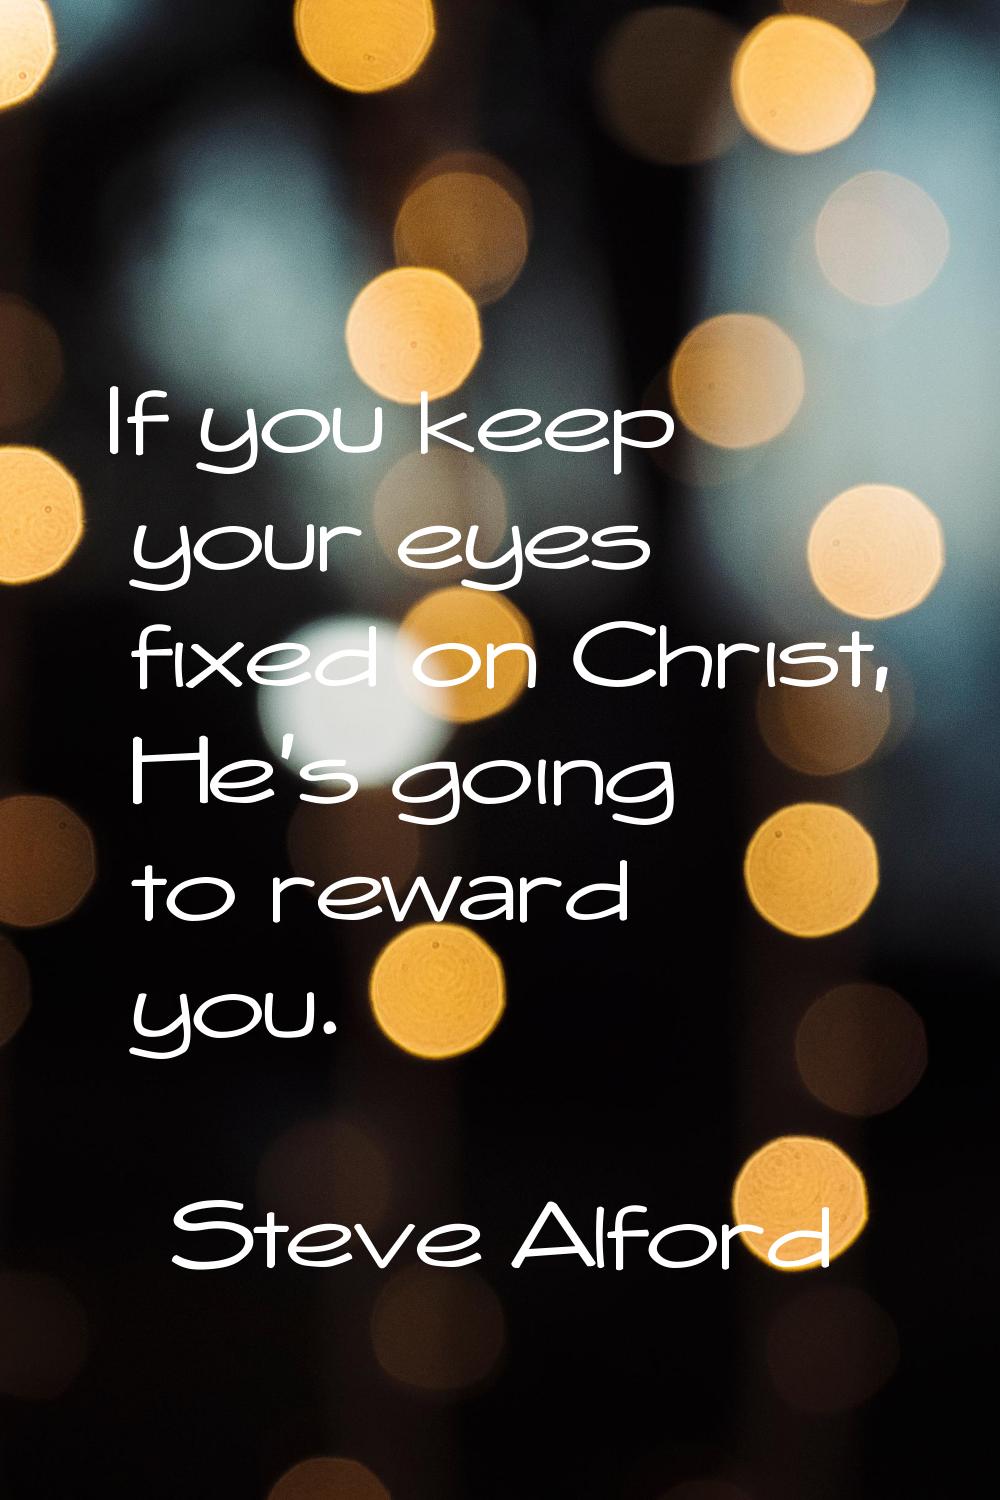 If you keep your eyes fixed on Christ, He's going to reward you.